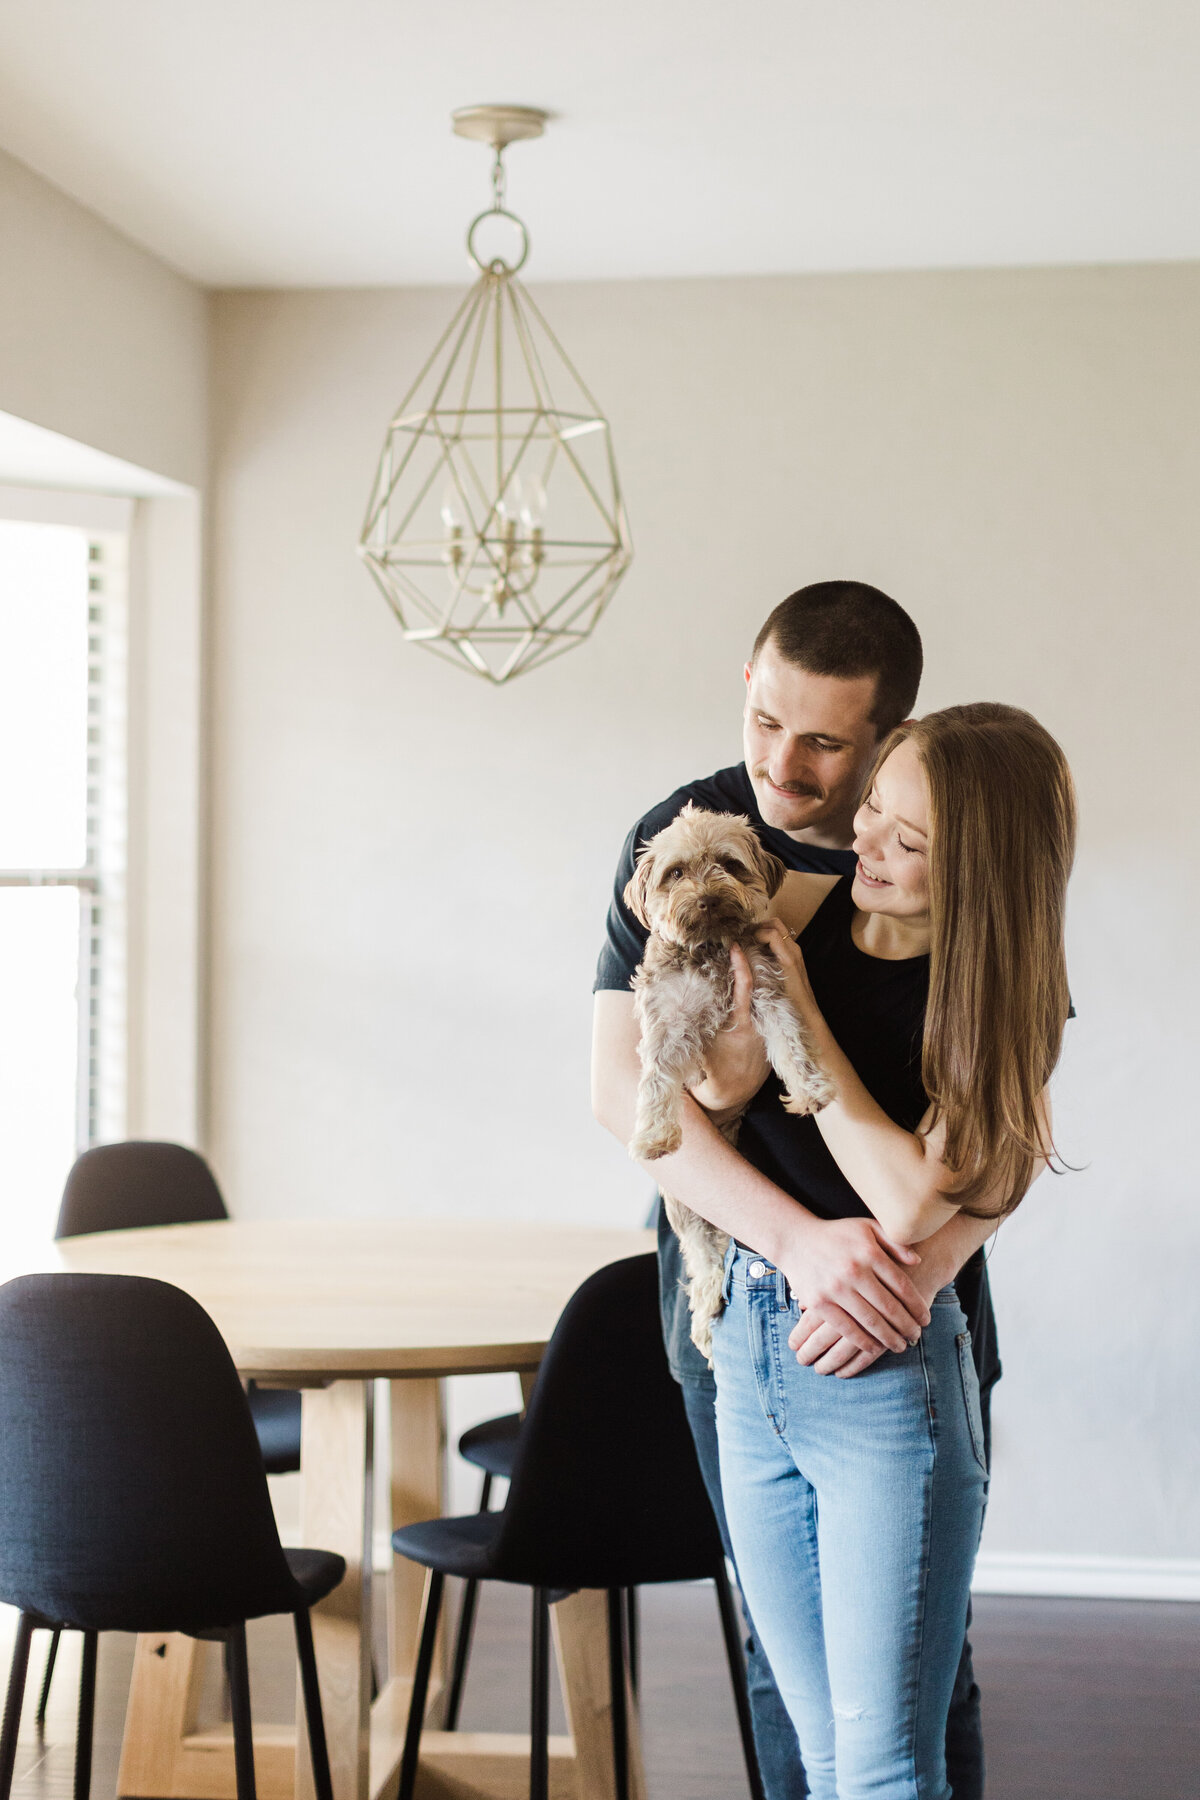 A photo of a man being the big spoon while his fiancé is both the little spoon and is holding their dog in their home during their engagement session in Fort Worth, Texas. Both the man and woman are wearing black shirts and jeans. Their dining room table can be seen in the background.